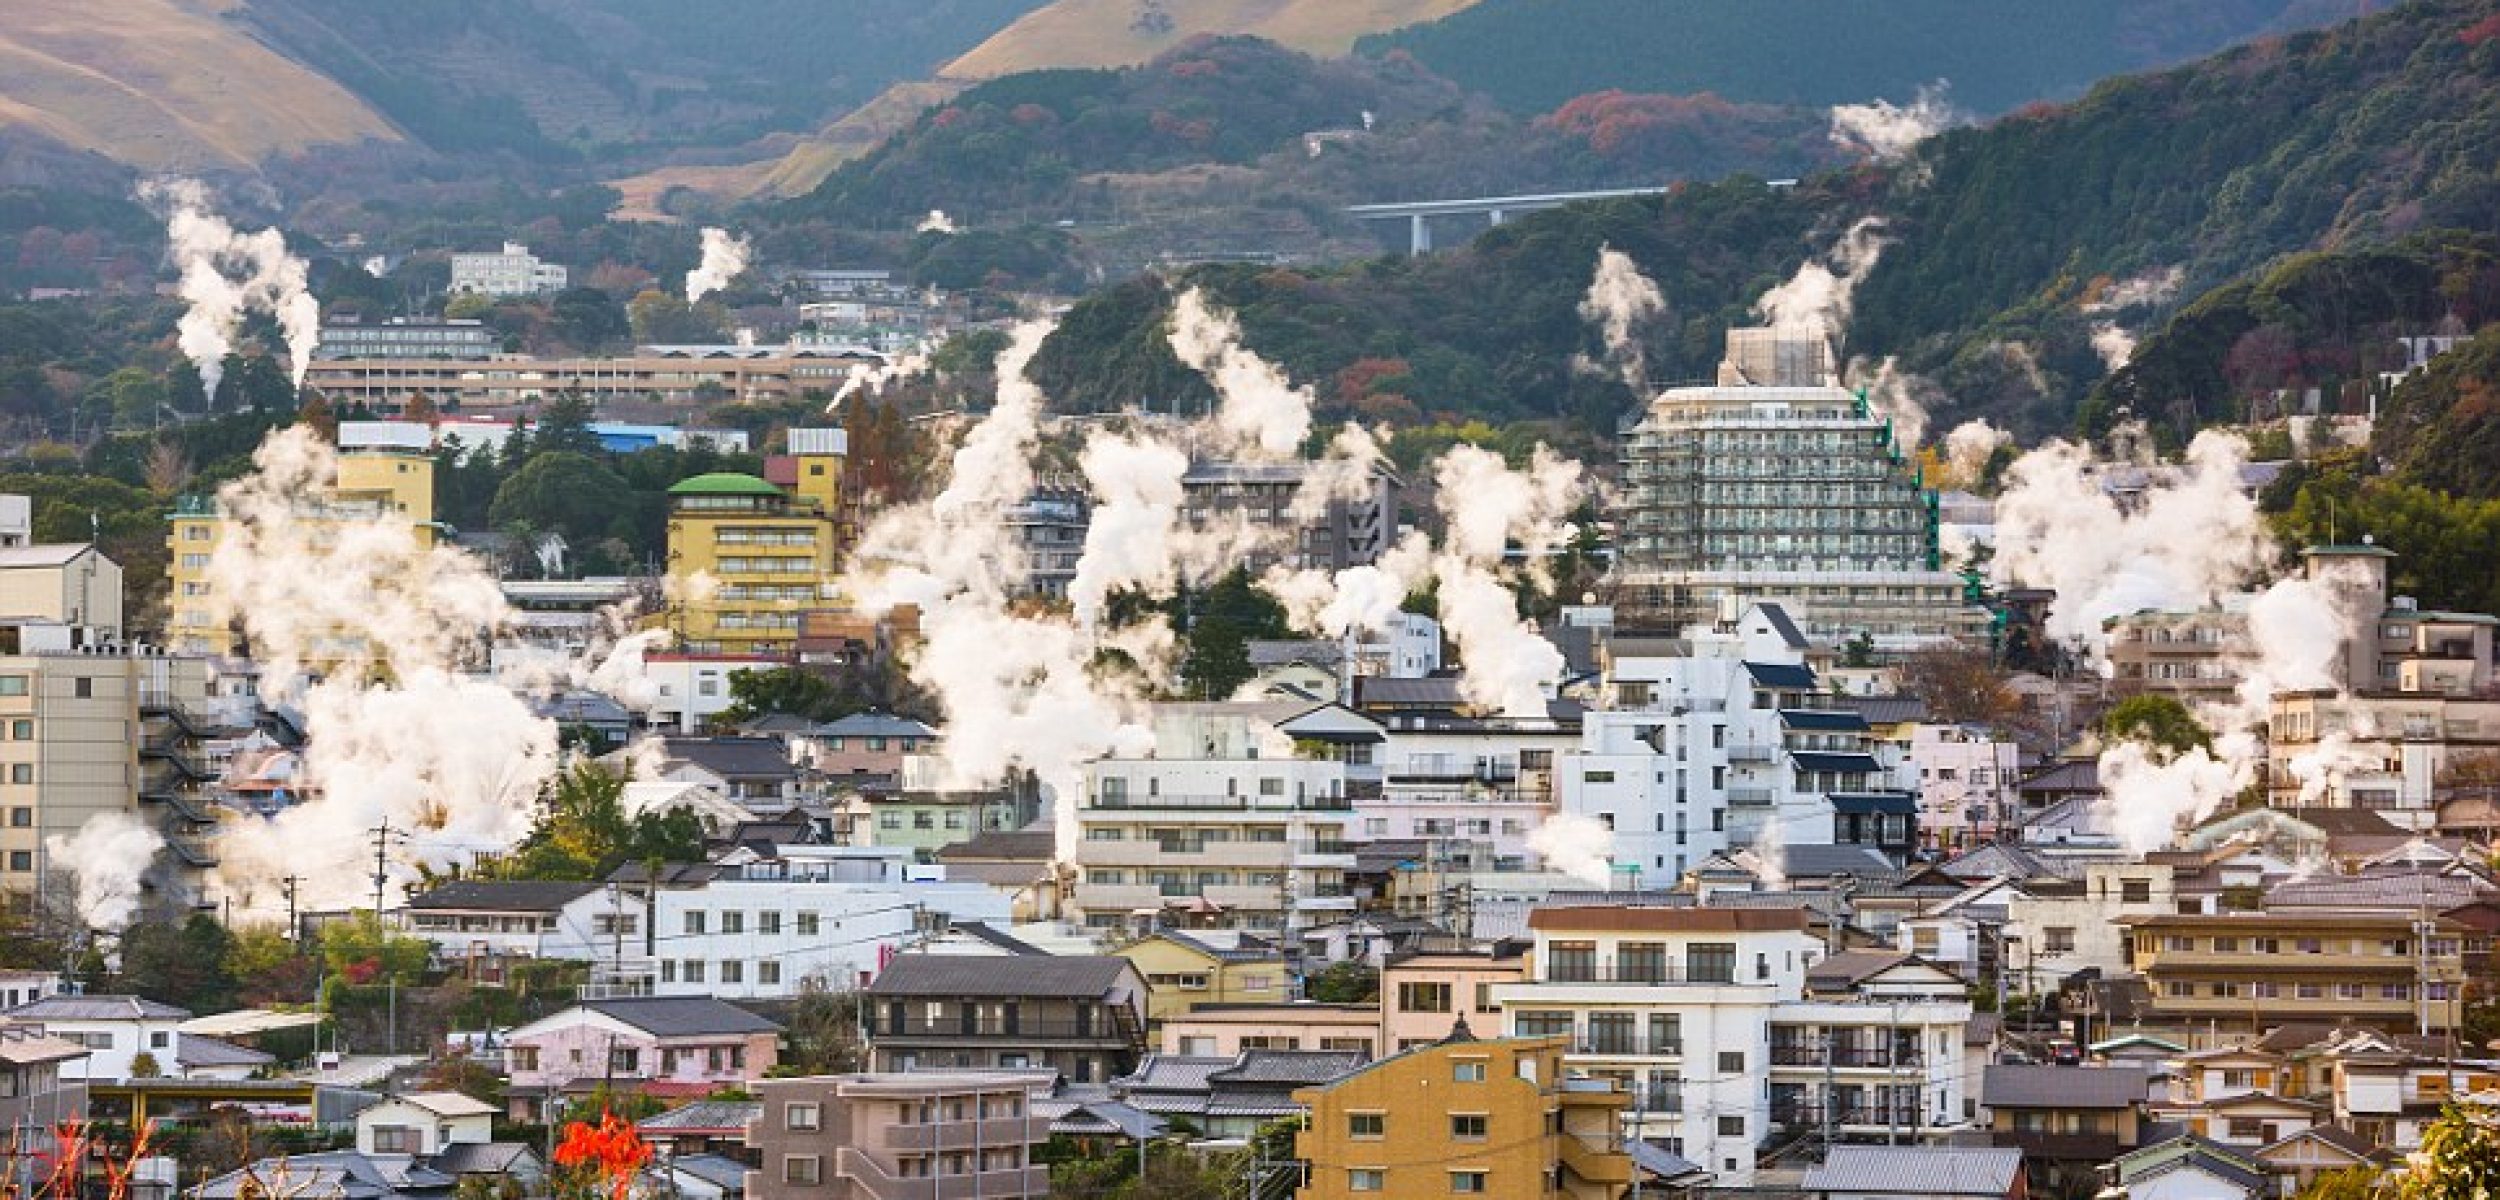 Actions of Small Destinations to Restore Tourism, Lessons from Beppu 1